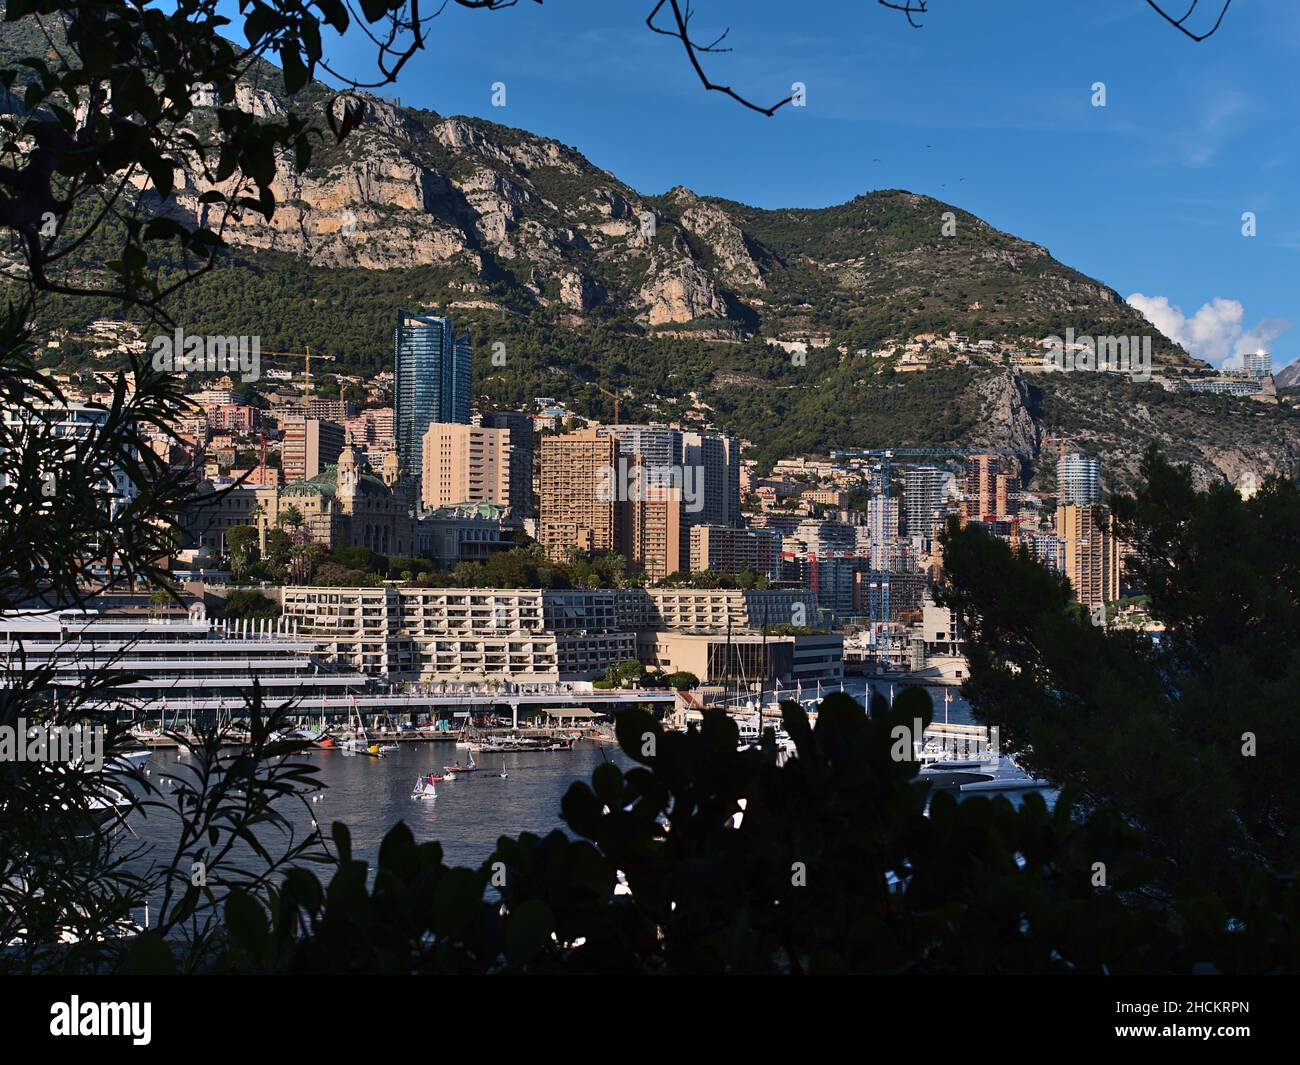 Cityscape of Monaco at the French Riviera with famous casino in district Monte Carlo surrounded by dense development with residential buildings. Stock Photo